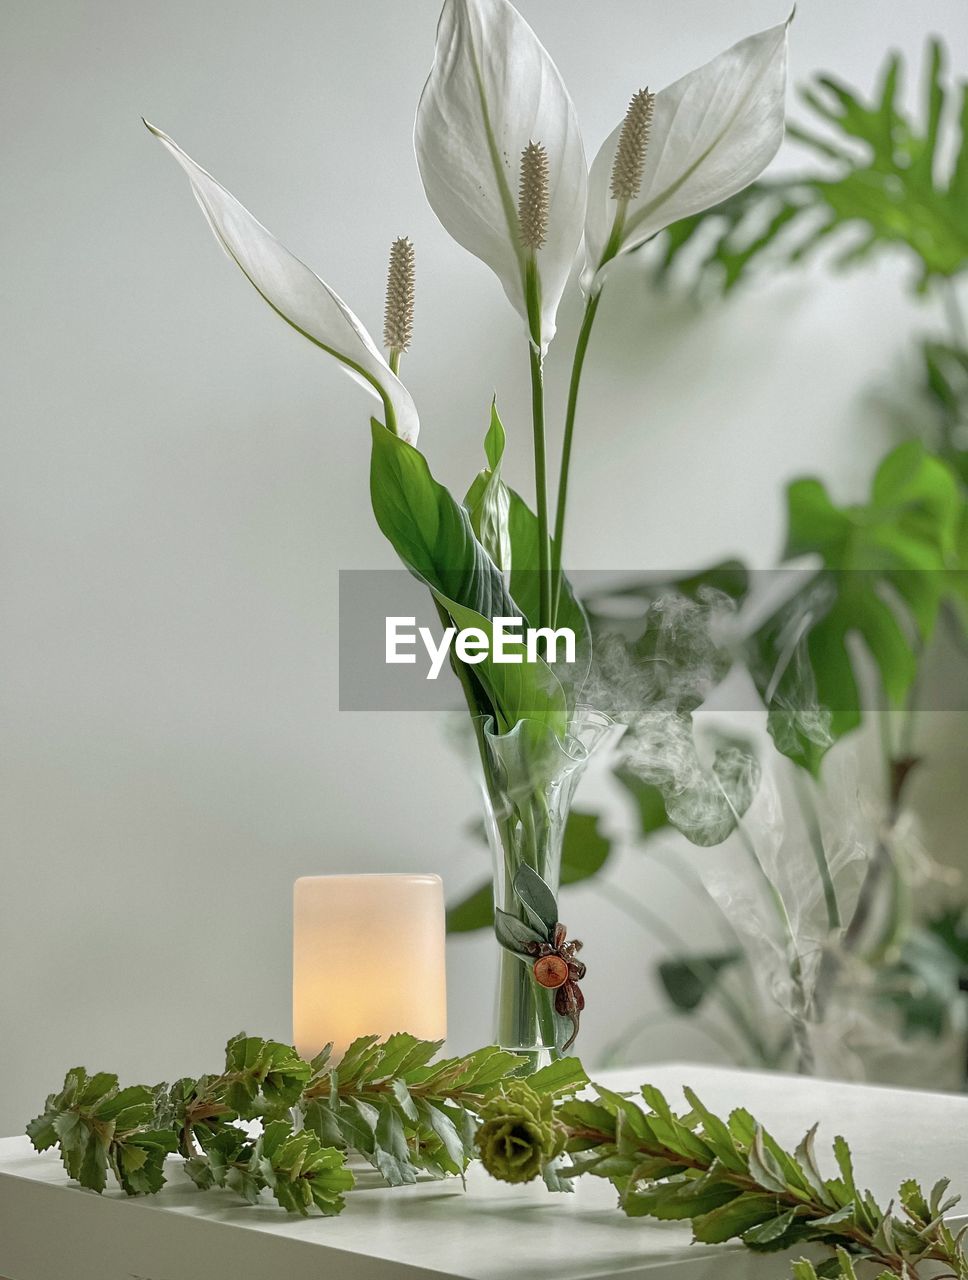 plant, green, floristry, flower, leaf, plant part, nature, food, food and drink, floral design, indoors, no people, freshness, branch, growth, herb, vegetable, studio shot, flowering plant, beauty in nature, still life, healthy eating, ikebana, wellbeing, close-up